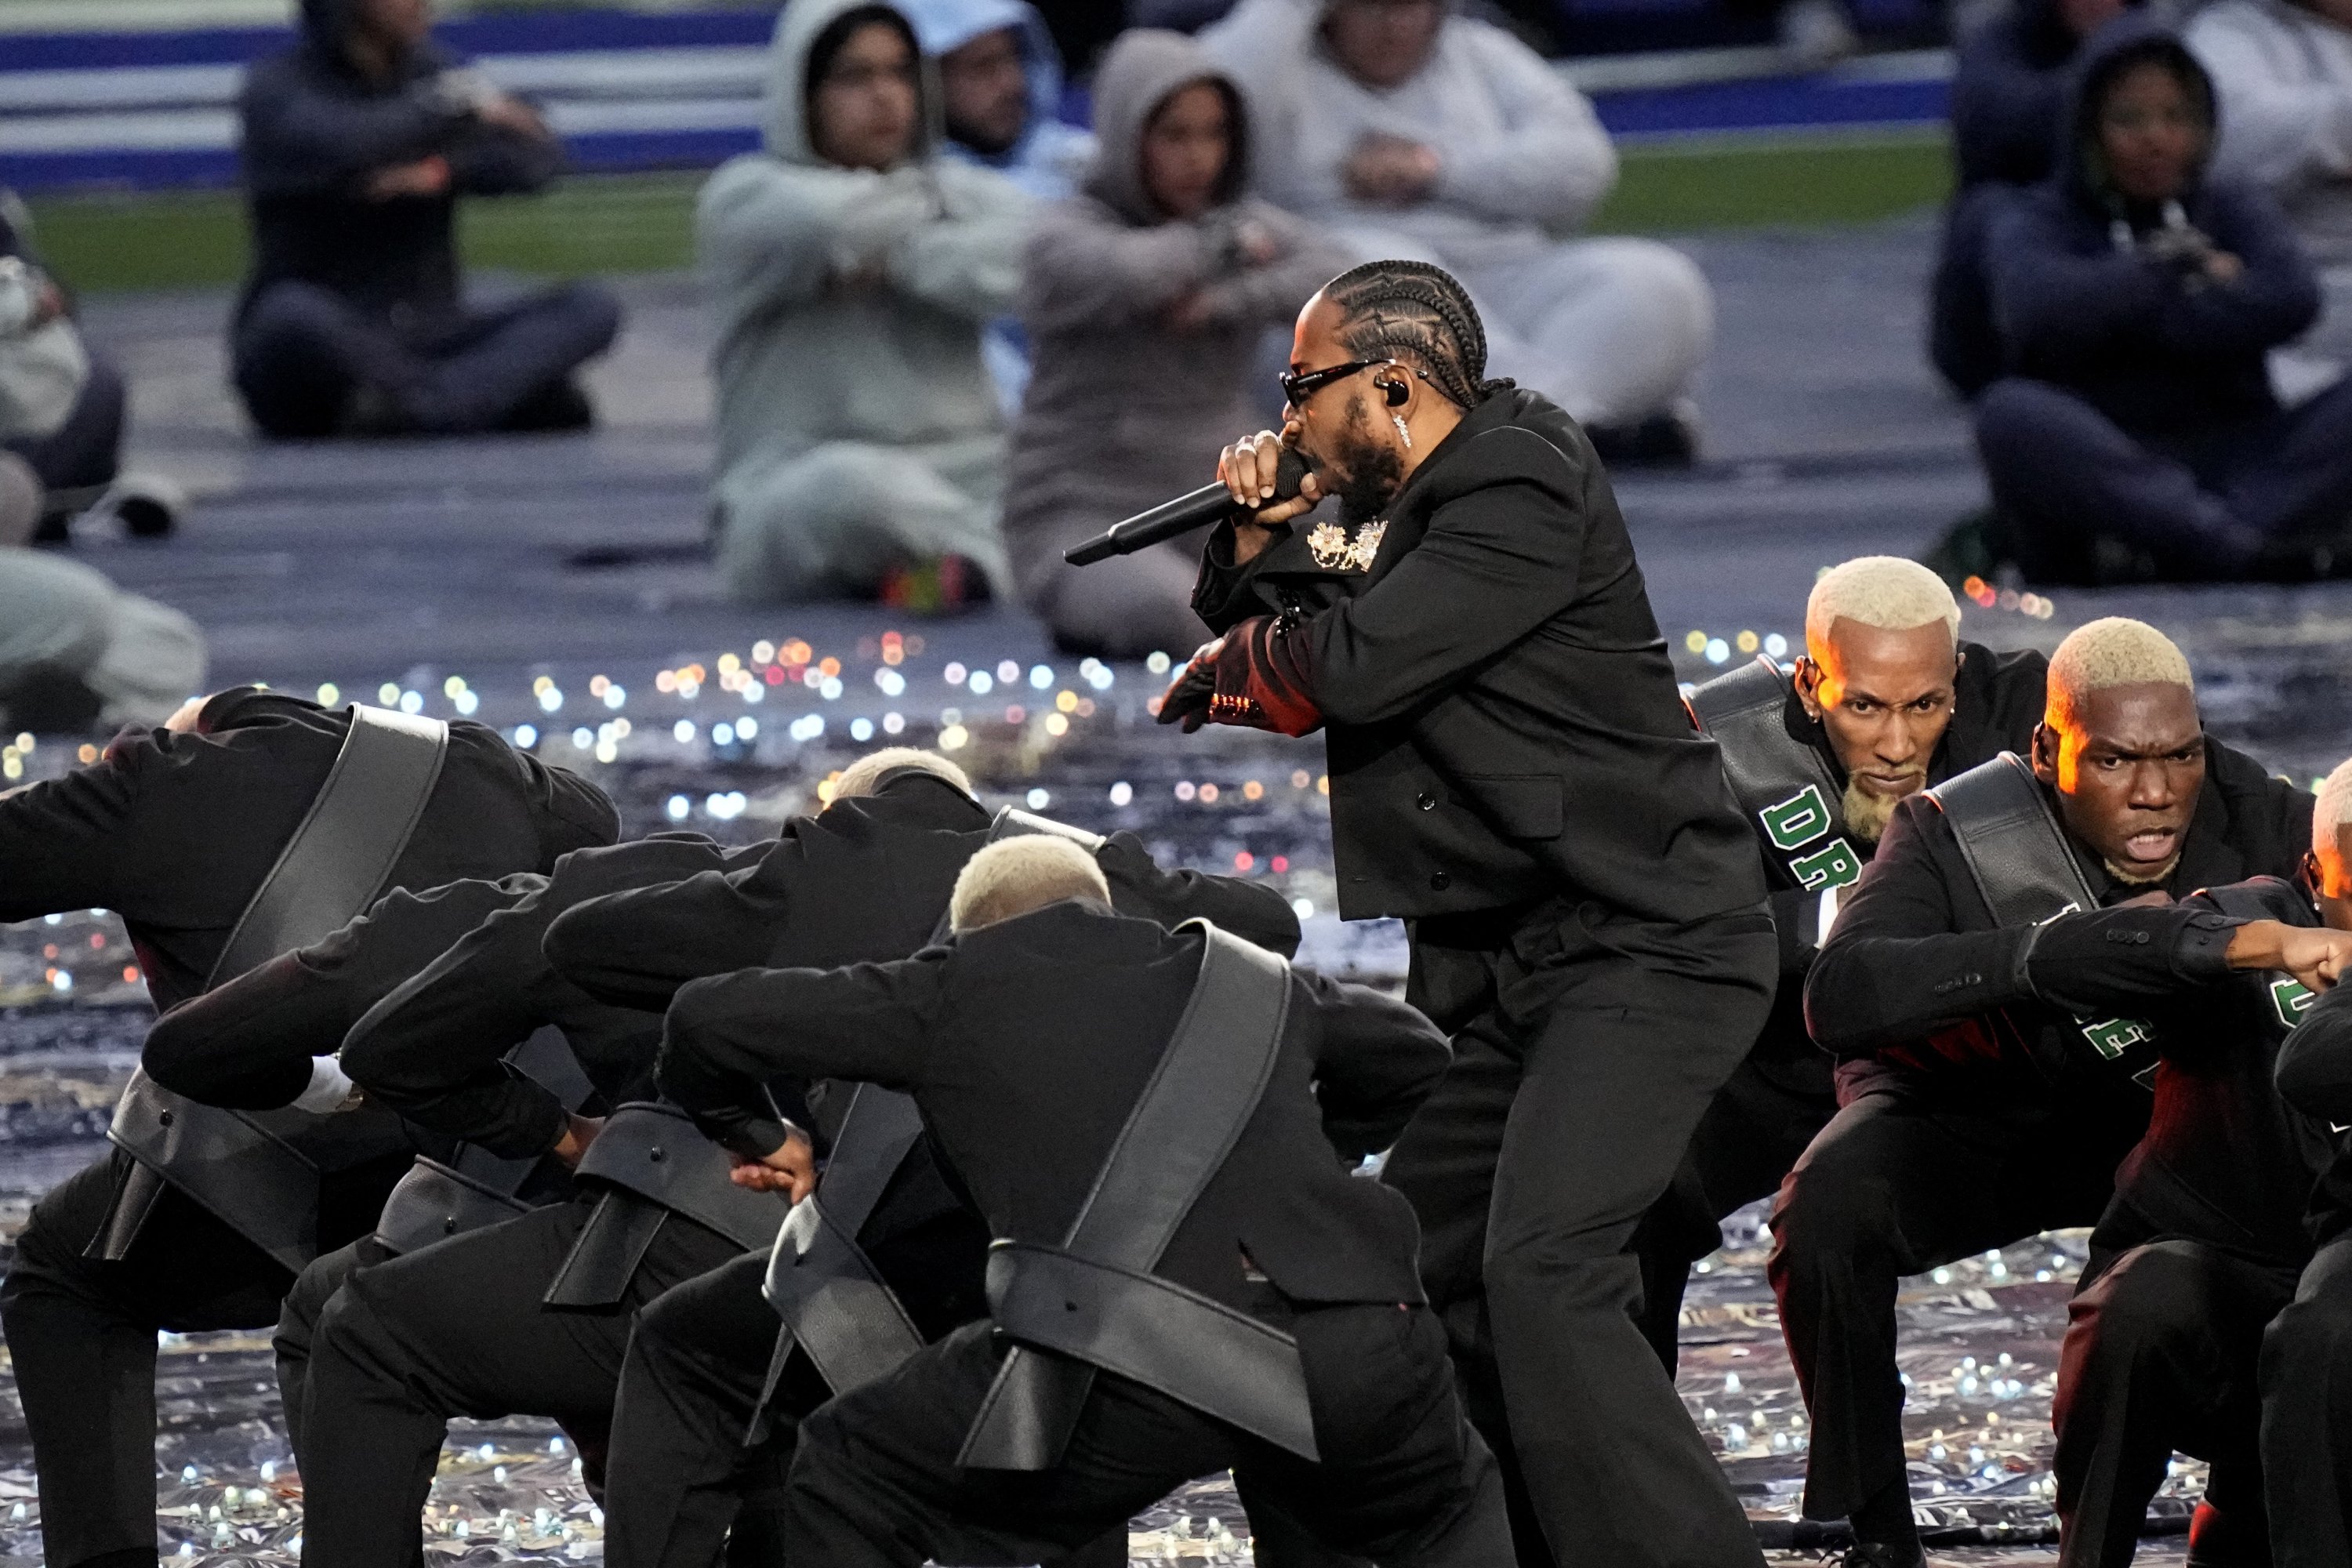 Kendrick Lamar performs during halftime of the NFL Super Bowl 56 football game between the Los Angeles Rams and the Cincinnati Bengals, Sunday, Feb. 13, 2022, in Inglewood, Calif. (AP Photo)